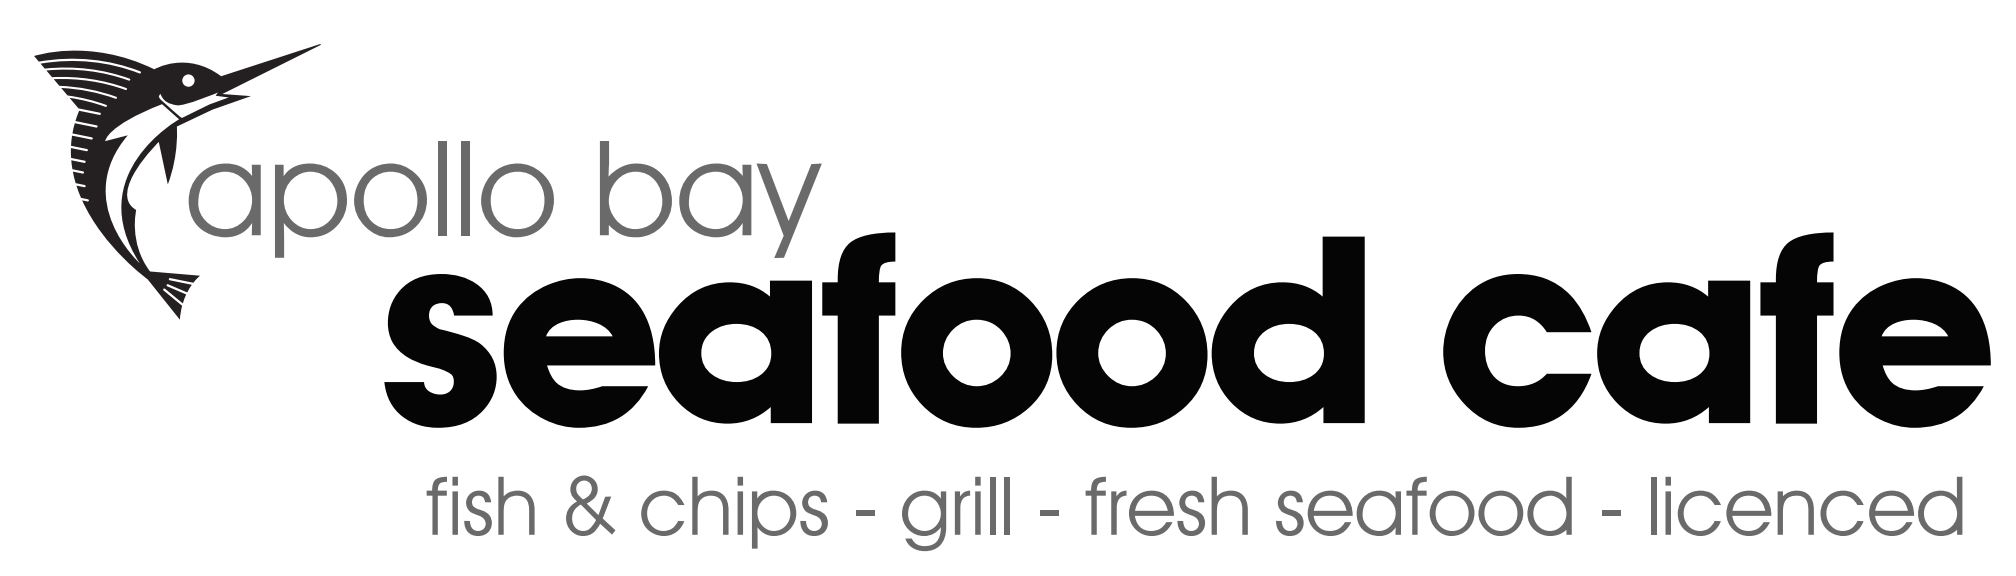 Link to Apollo Bay Seafood Cafe website